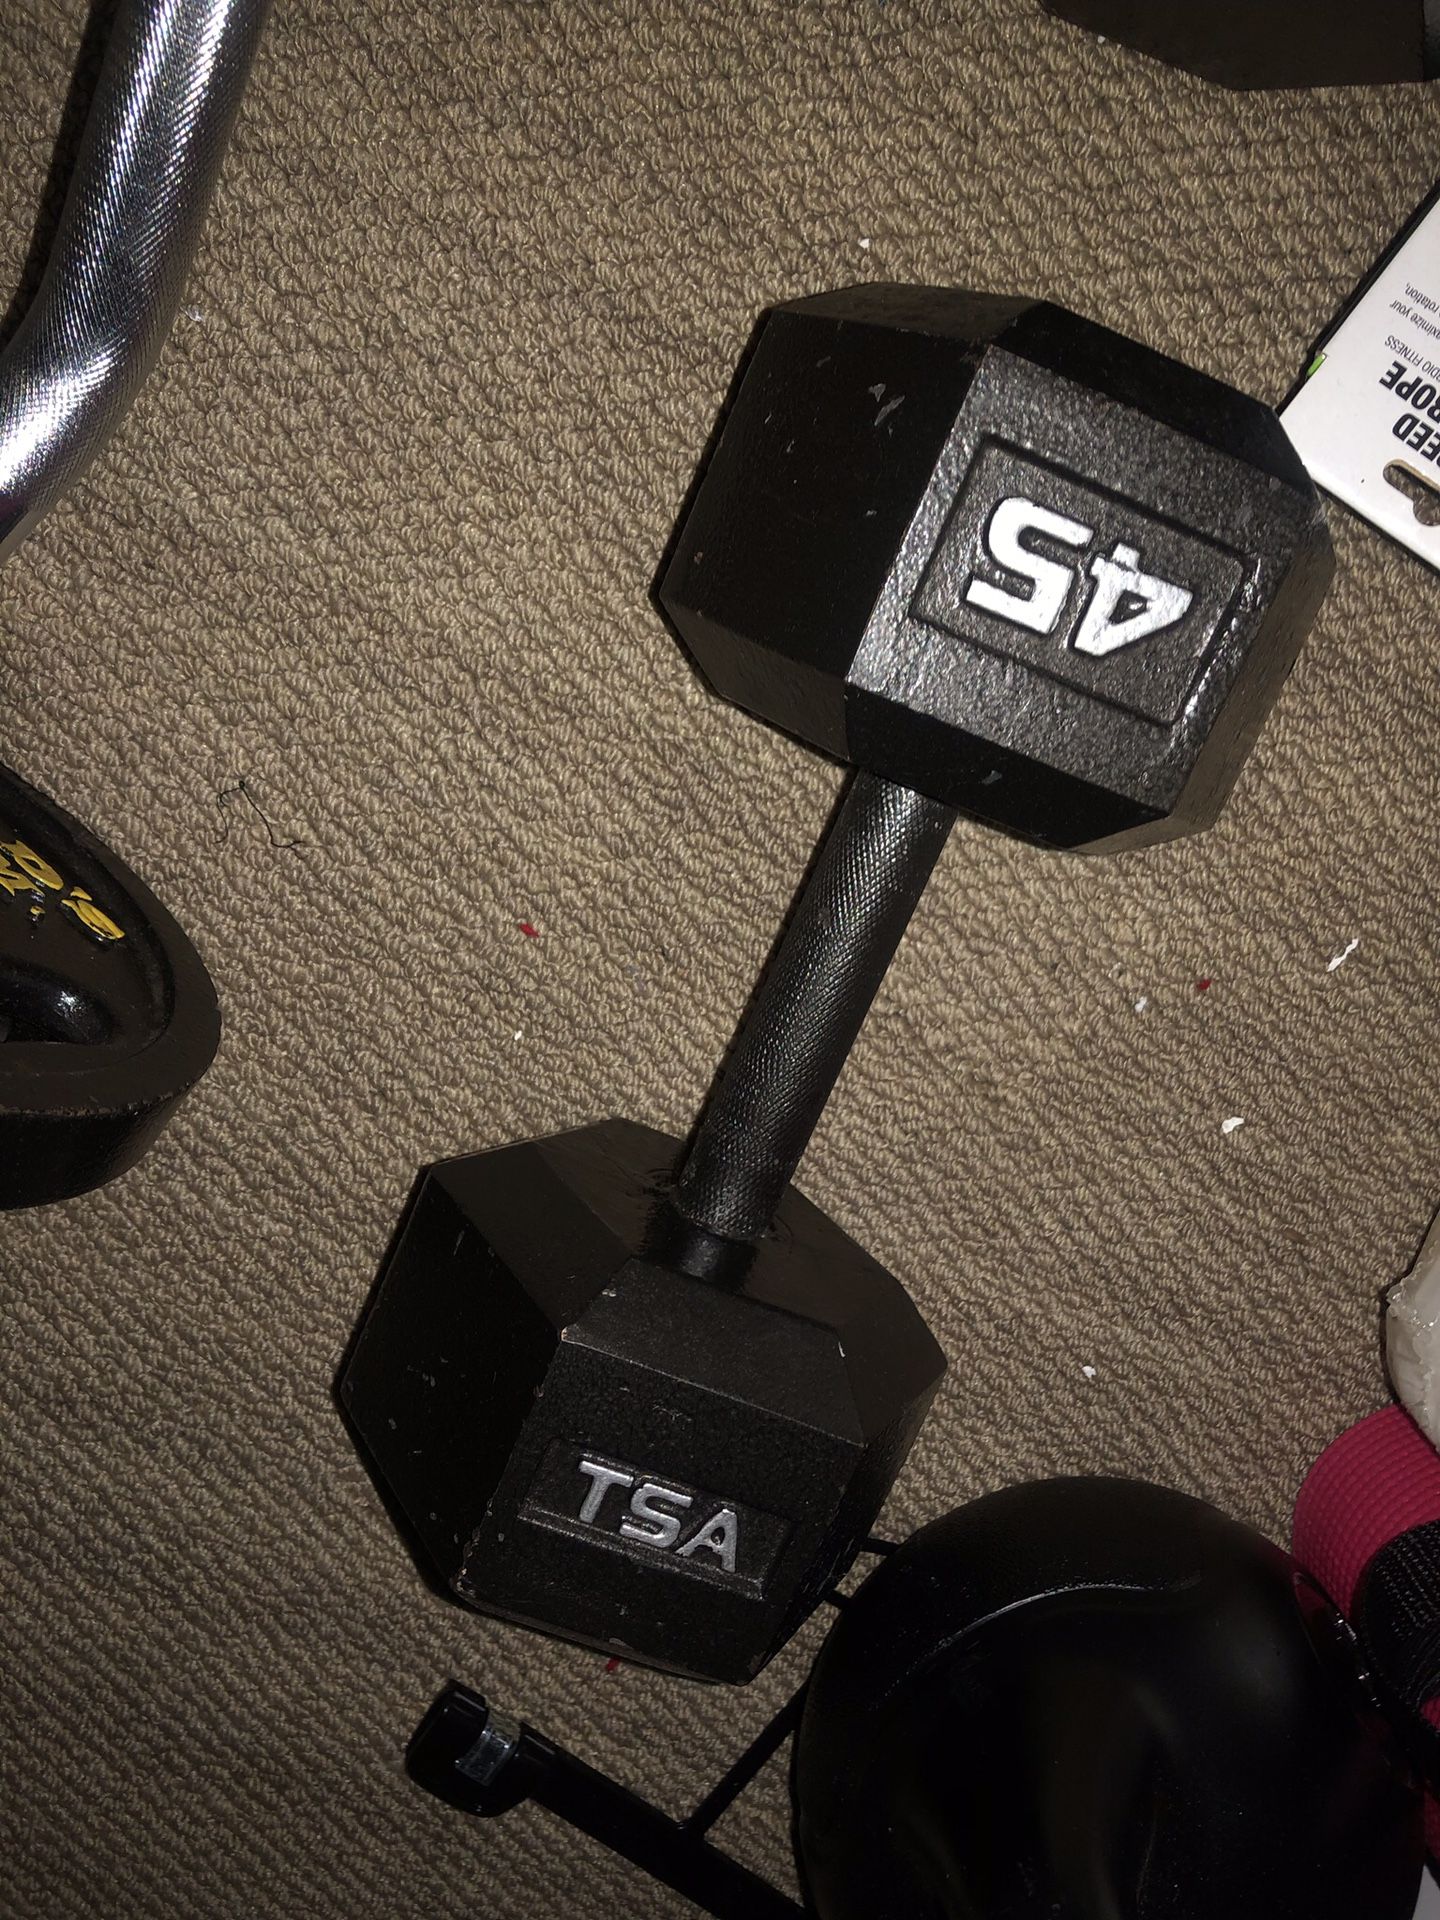 Dumbell set 45s and kettle bell 15s